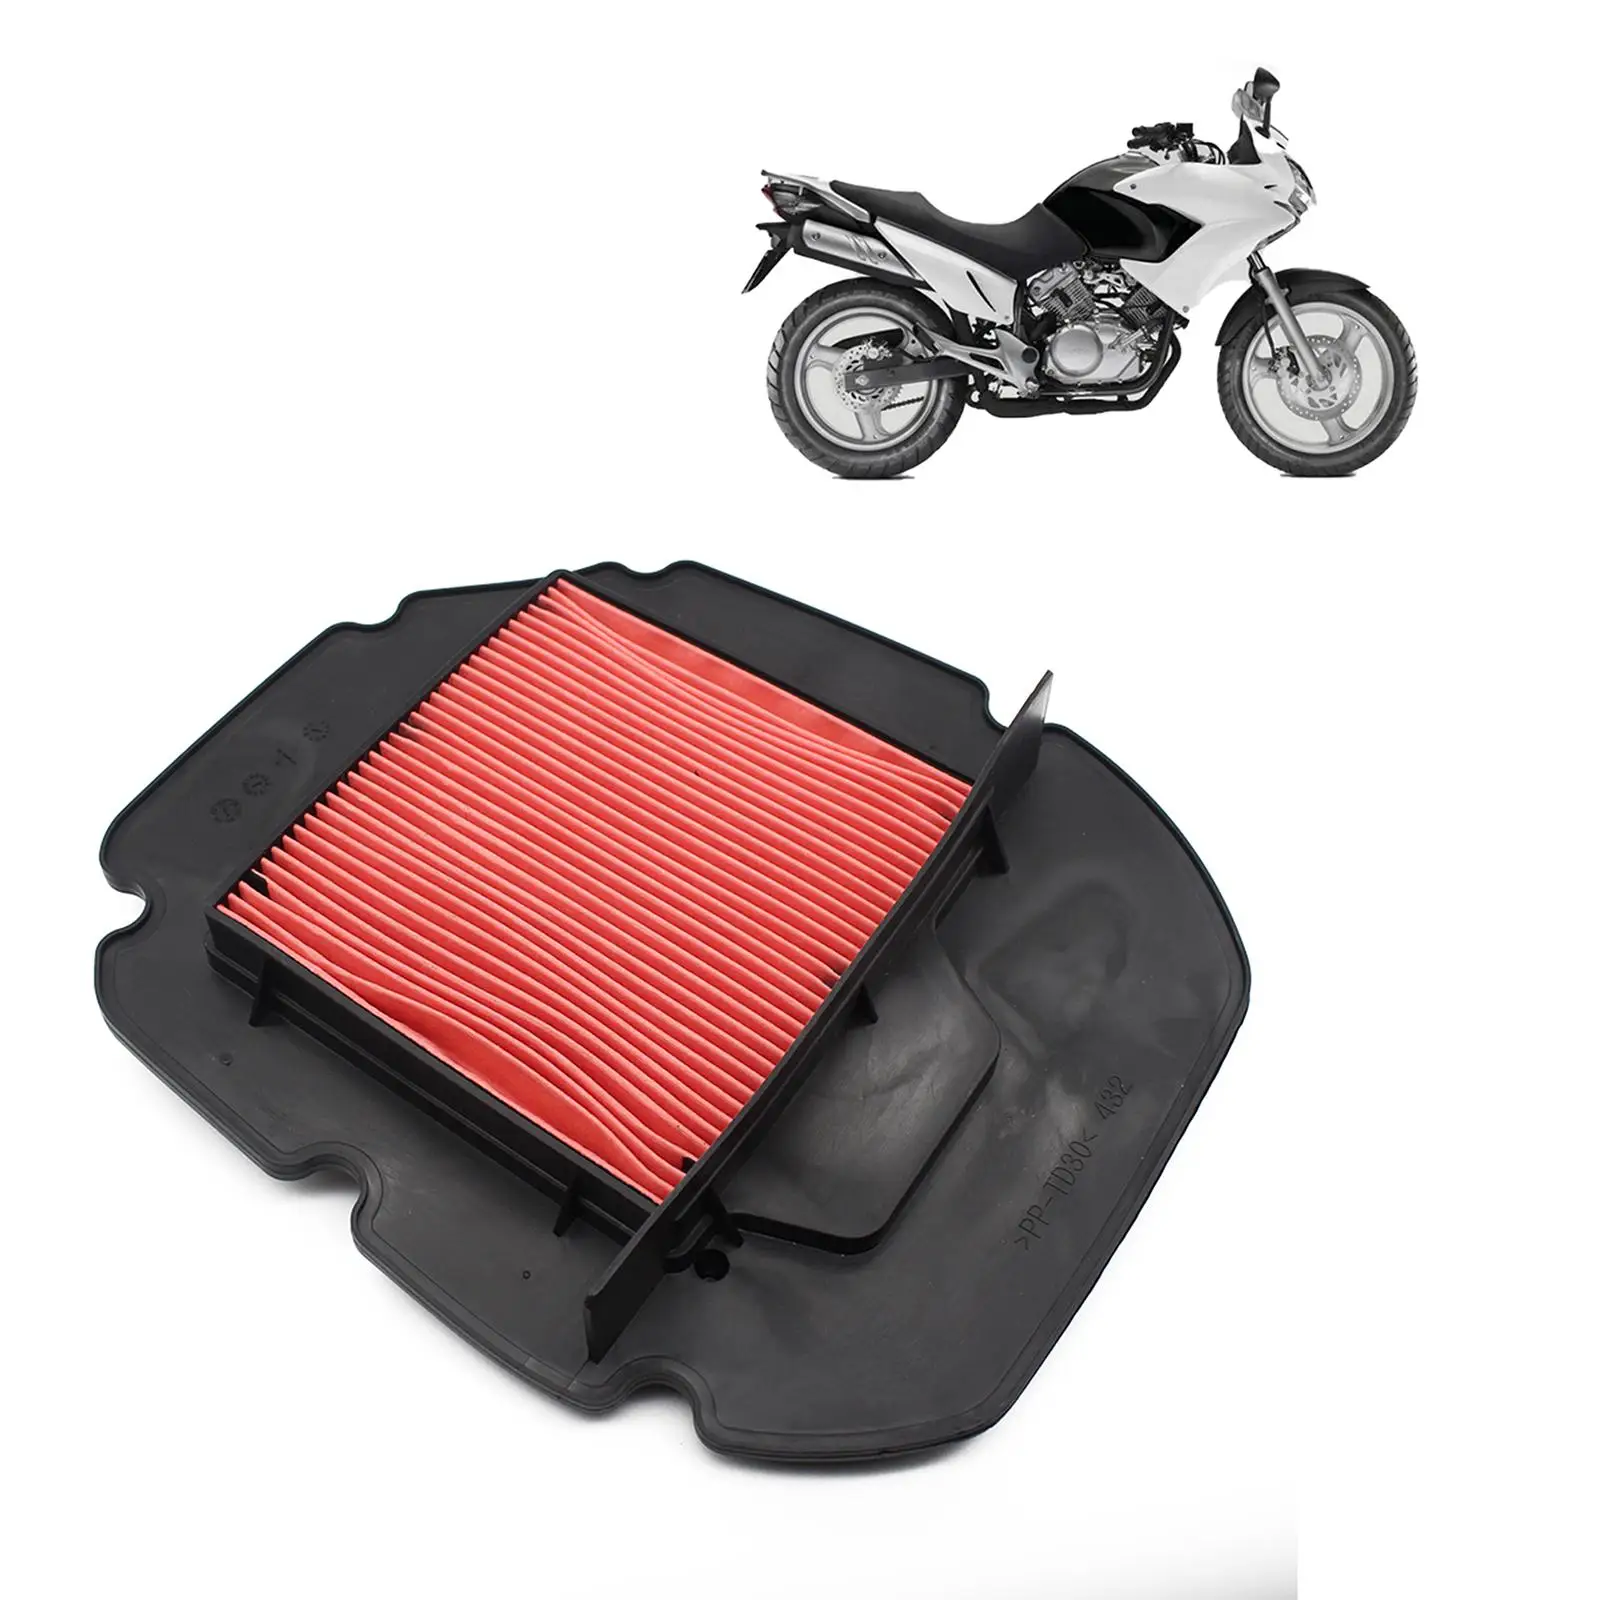 Air Filter Cleaner Motorcycle for Vtr1000F 1997-05 1999-02